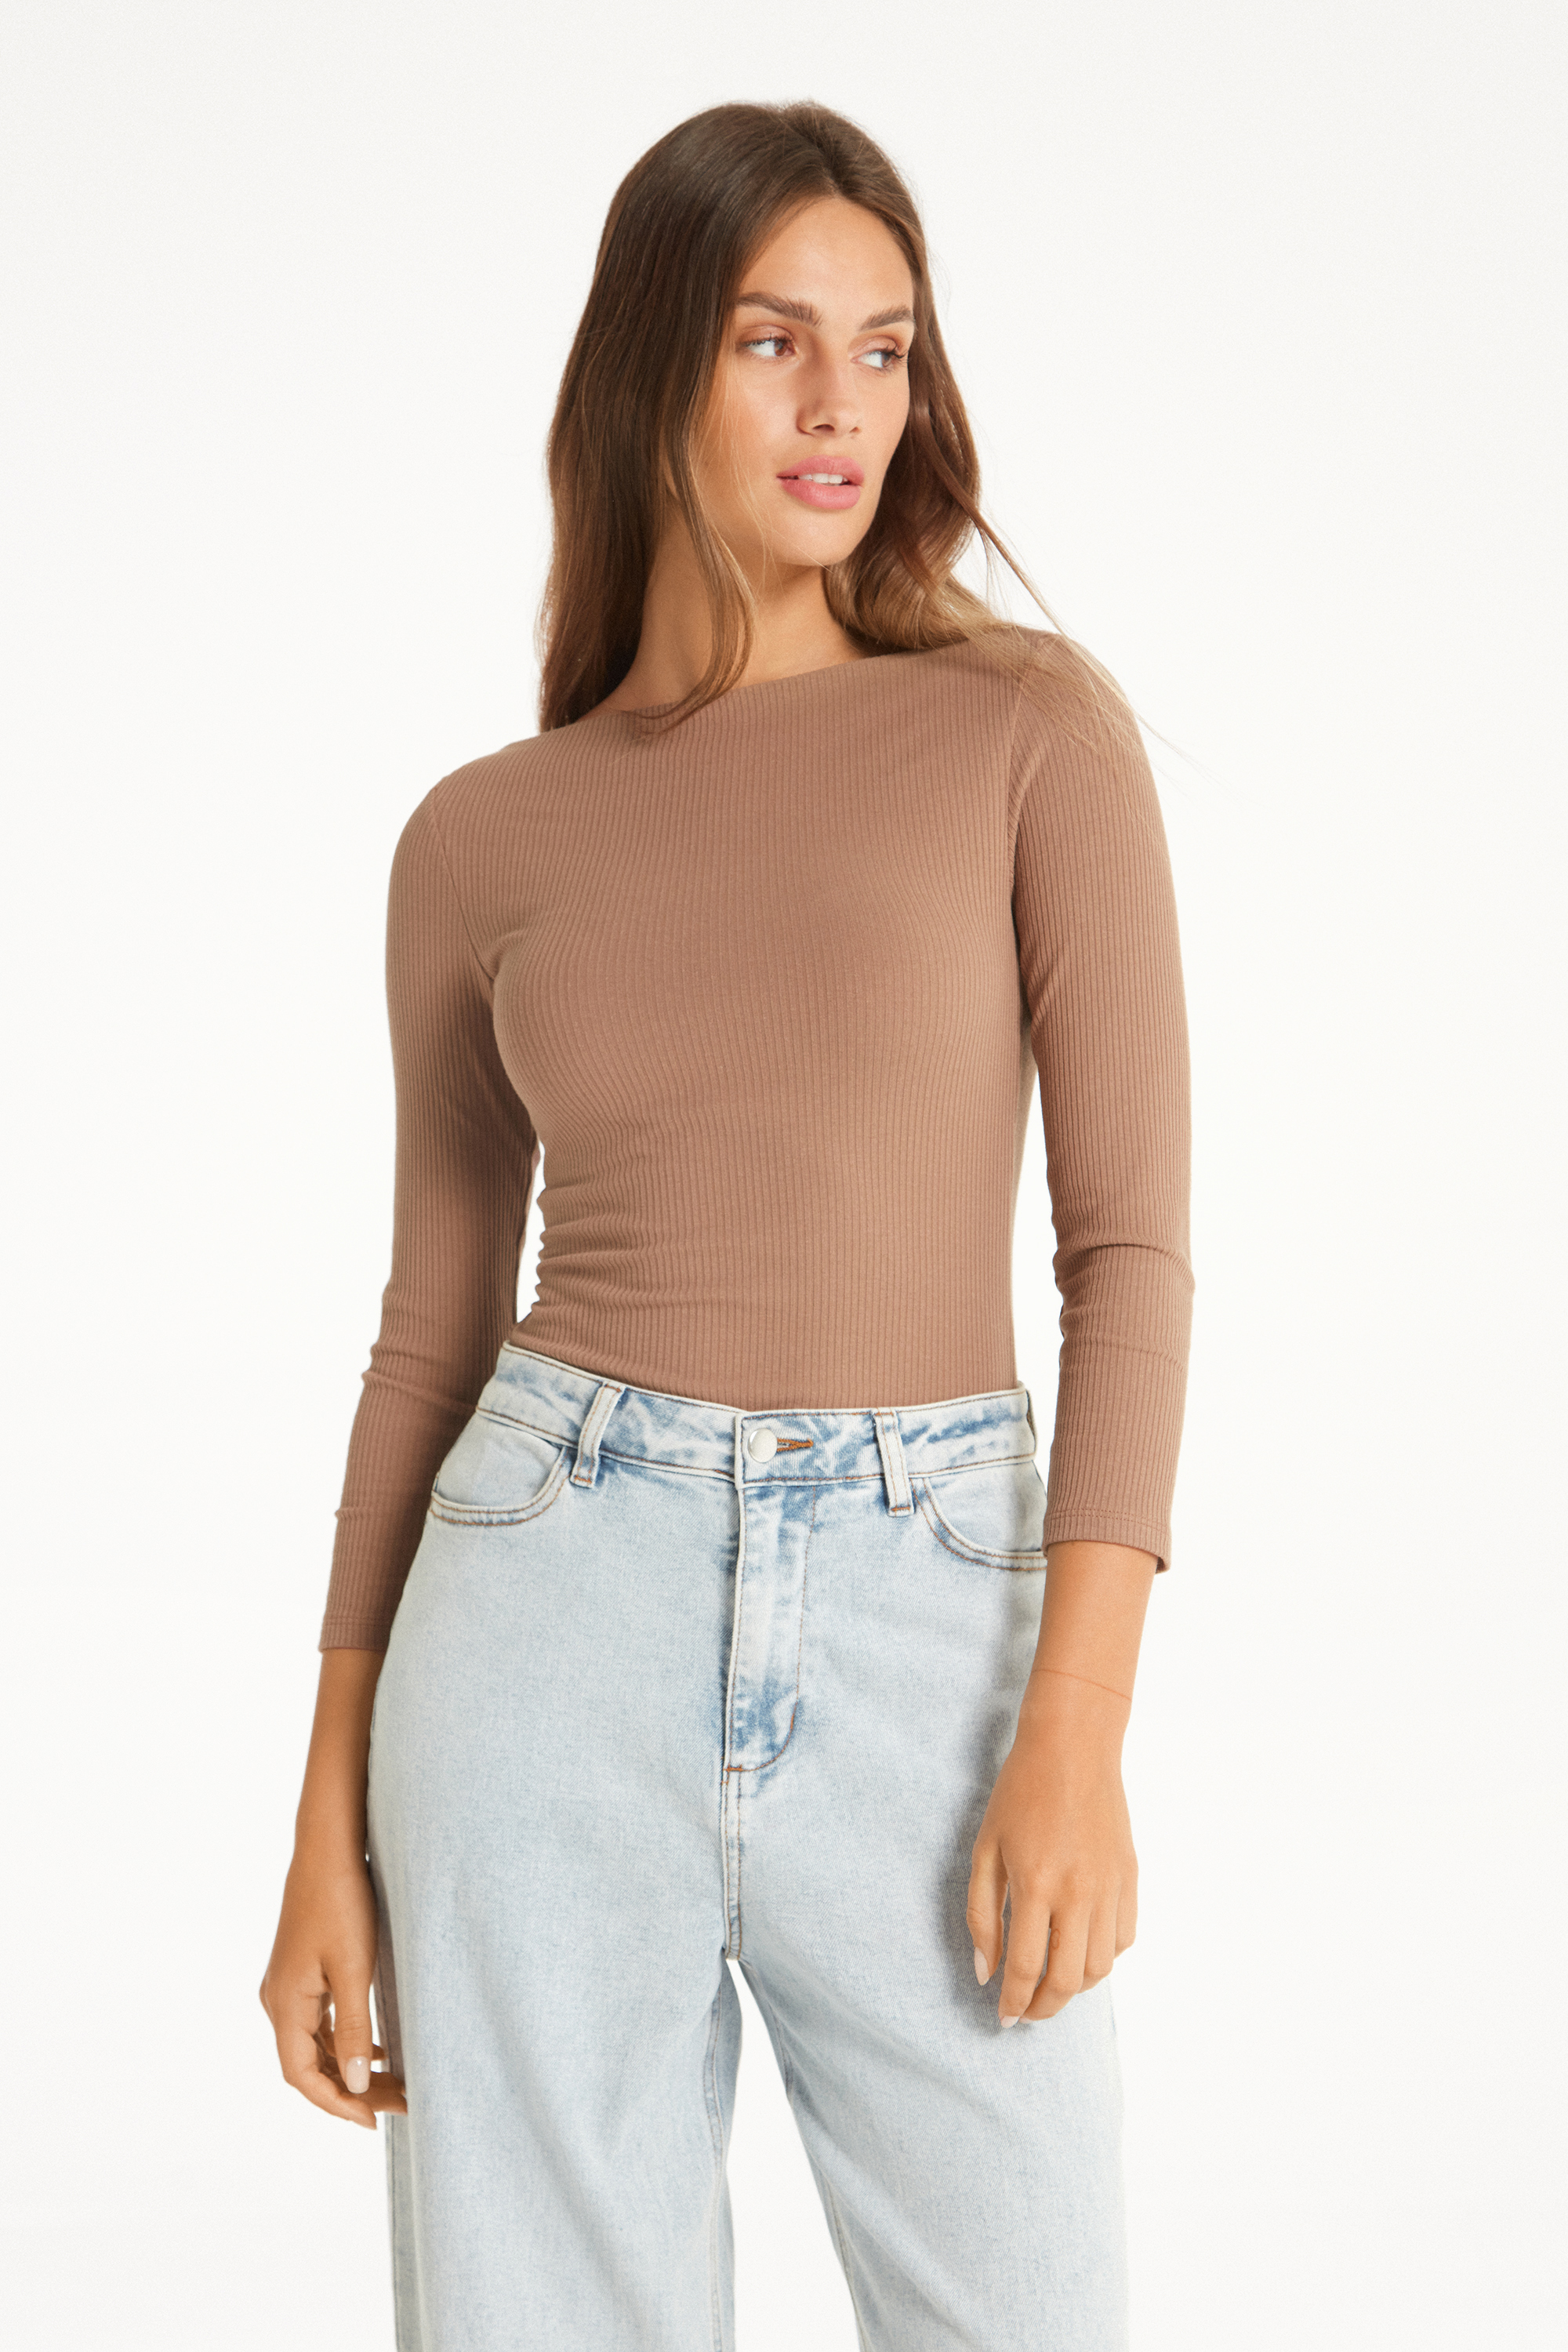 3/4 Length Sleeve Ribbed Top with Boat Neck